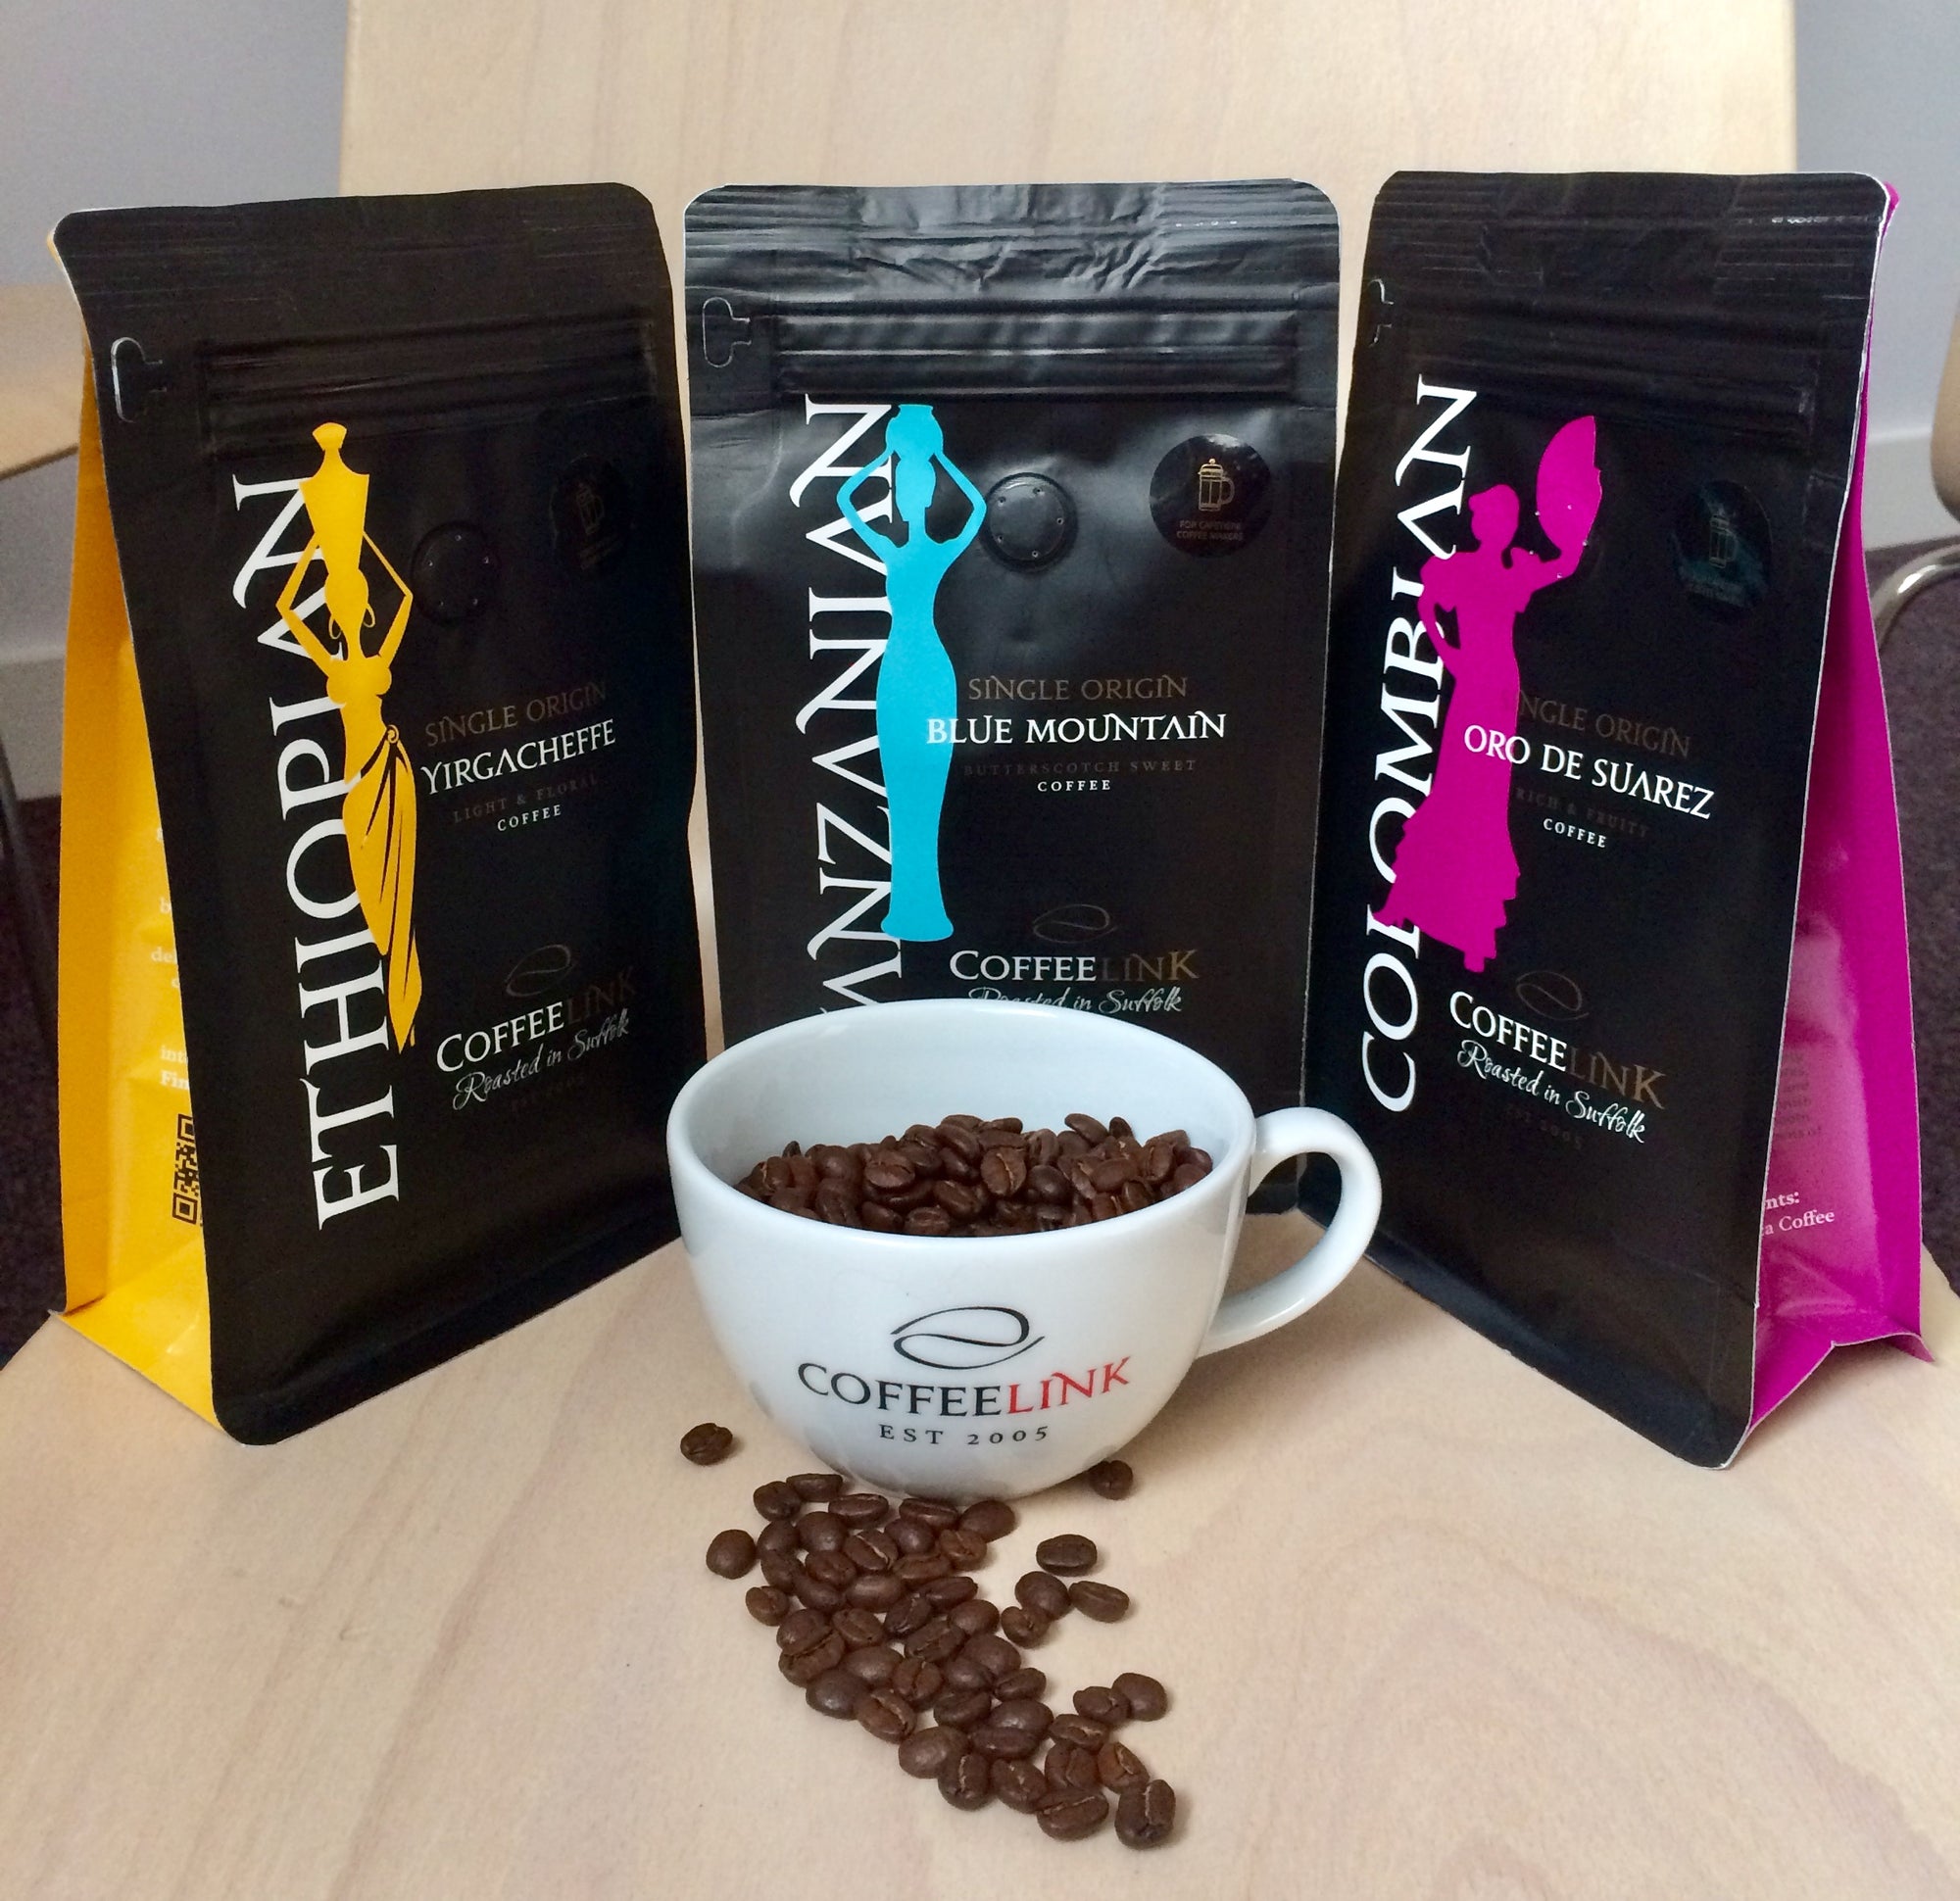 Coffeelink Roasting their ethically sourced beans!